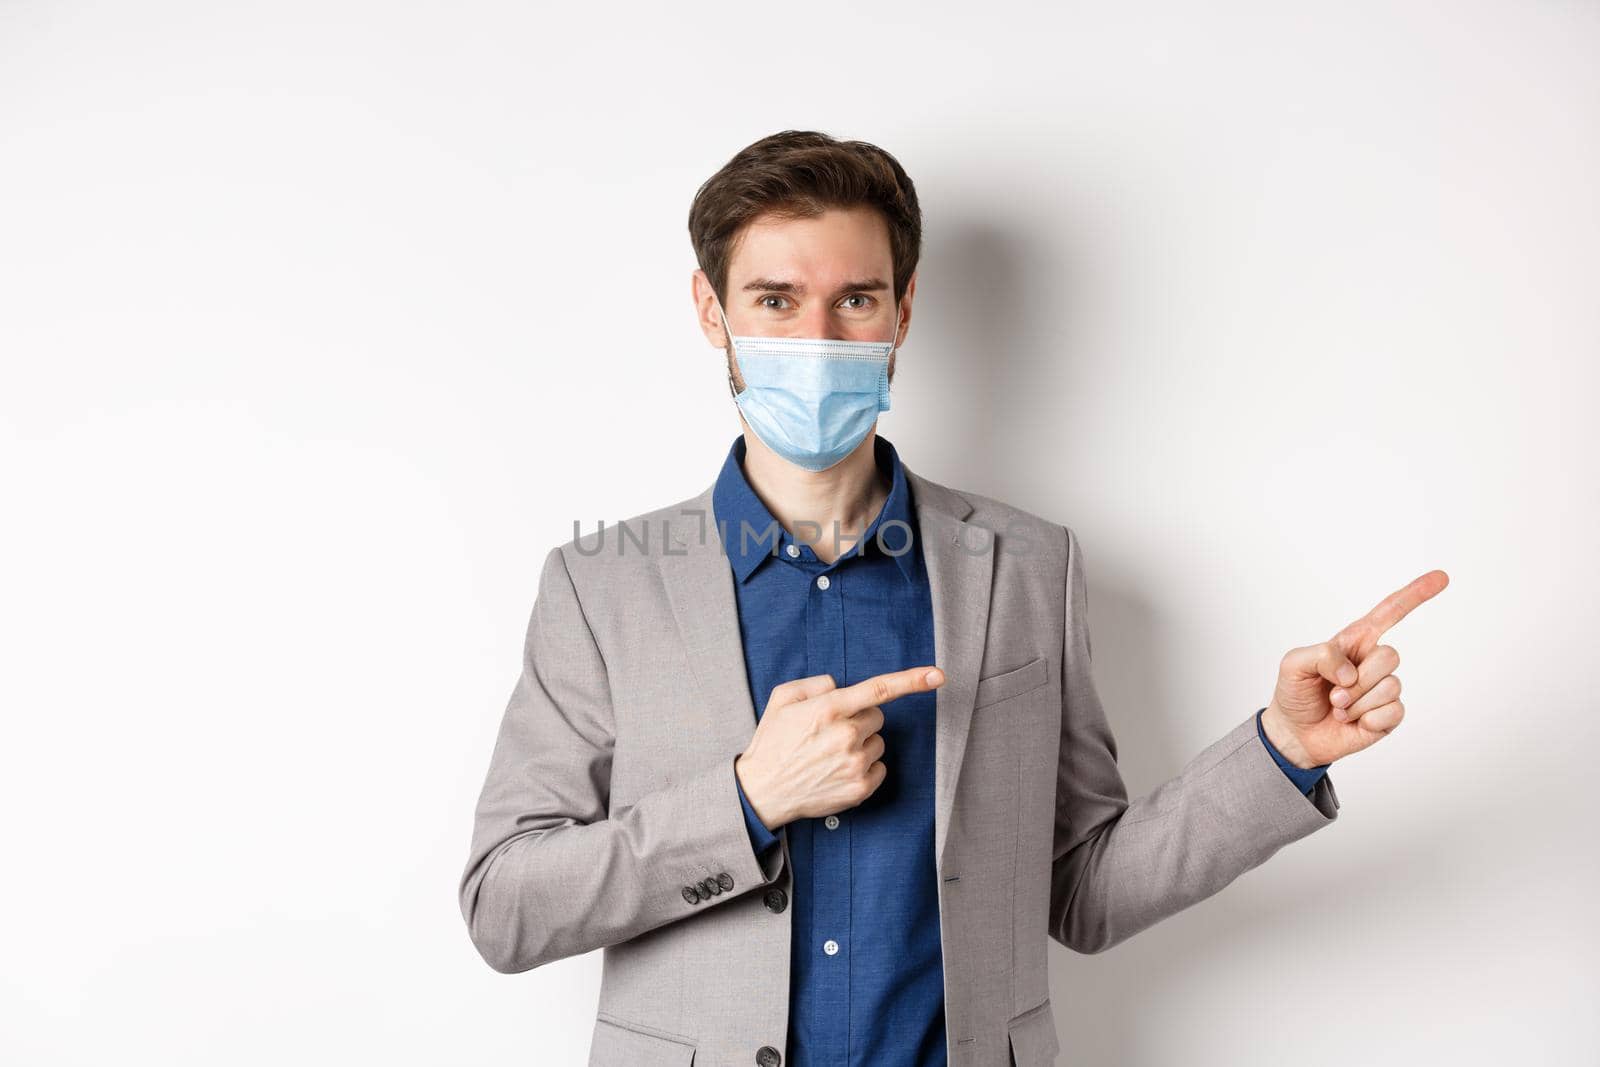 Covid-19, pandemic and business concept. Confident male manager in suit and medical mask showing way, pointing fingers right at advertisement, white background.